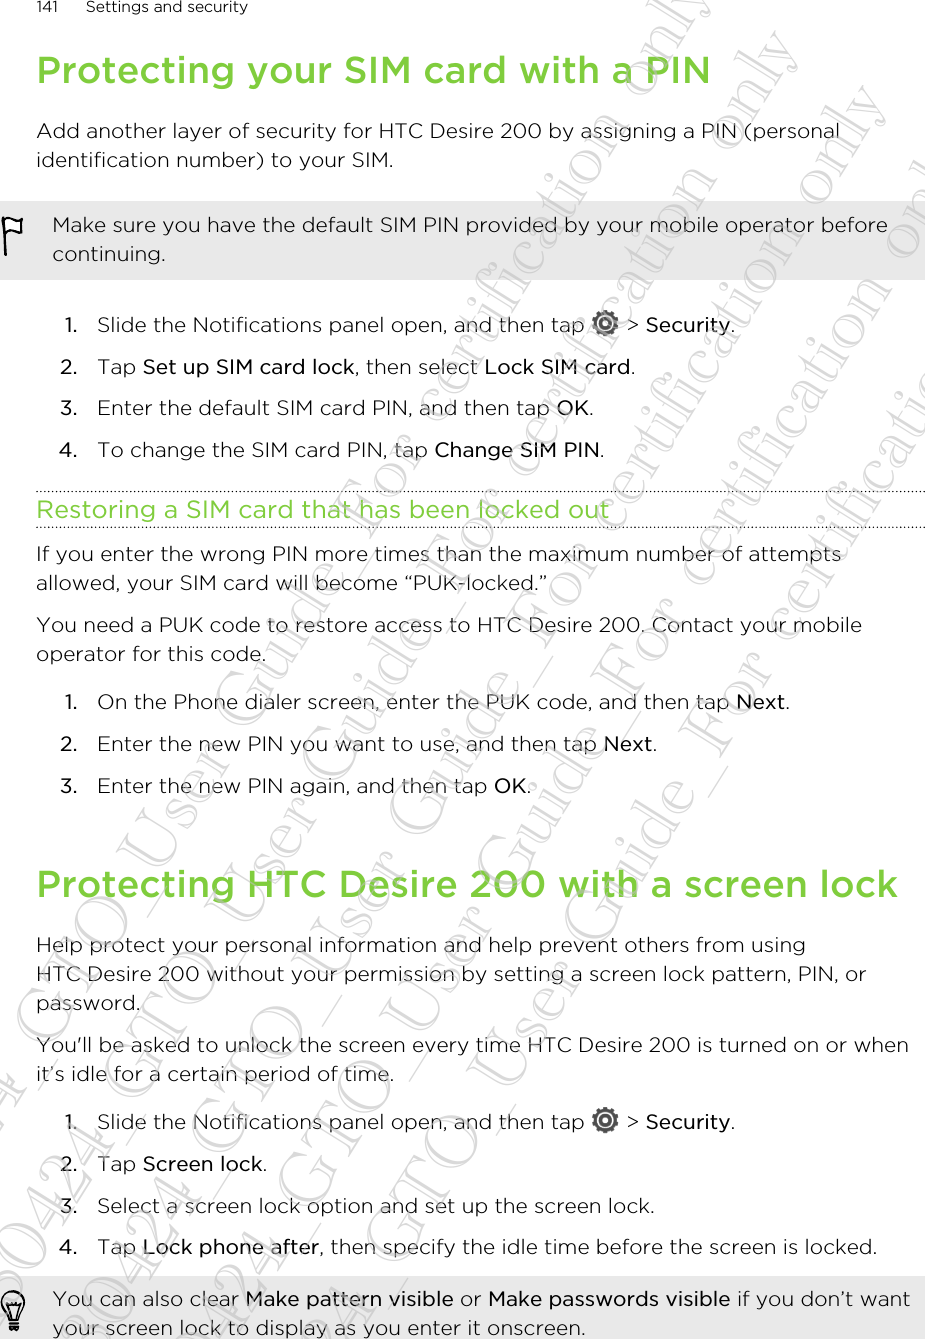 Protecting your SIM card with a PINAdd another layer of security for HTC Desire 200 by assigning a PIN (personalidentification number) to your SIM.Make sure you have the default SIM PIN provided by your mobile operator beforecontinuing.1. Slide the Notifications panel open, and then tap   &gt; Security.2. Tap Set up SIM card lock, then select Lock SIM card.3. Enter the default SIM card PIN, and then tap OK.4. To change the SIM card PIN, tap Change SIM PIN.Restoring a SIM card that has been locked outIf you enter the wrong PIN more times than the maximum number of attemptsallowed, your SIM card will become “PUK-locked.”You need a PUK code to restore access to HTC Desire 200. Contact your mobileoperator for this code.1. On the Phone dialer screen, enter the PUK code, and then tap Next.2. Enter the new PIN you want to use, and then tap Next.3. Enter the new PIN again, and then tap OK.Protecting HTC Desire 200 with a screen lockHelp protect your personal information and help prevent others from usingHTC Desire 200 without your permission by setting a screen lock pattern, PIN, orpassword.You&apos;ll be asked to unlock the screen every time HTC Desire 200 is turned on or whenit’s idle for a certain period of time.1. Slide the Notifications panel open, and then tap   &gt; Security.2. Tap Screen lock.3. Select a screen lock option and set up the screen lock.4. Tap Lock phone after, then specify the idle time before the screen is locked. You can also clear Make pattern visible or Make passwords visible if you don’t wantyour screen lock to display as you enter it onscreen.141 Settings and security20130424_GTO_User Guide_For certification only 20130424_GTO_User Guide_For certification only 20130424_GTO_User Guide_For certification only 20130424_GTO_User Guide_For certification only 20130424_GTO_User Guide_For certification only